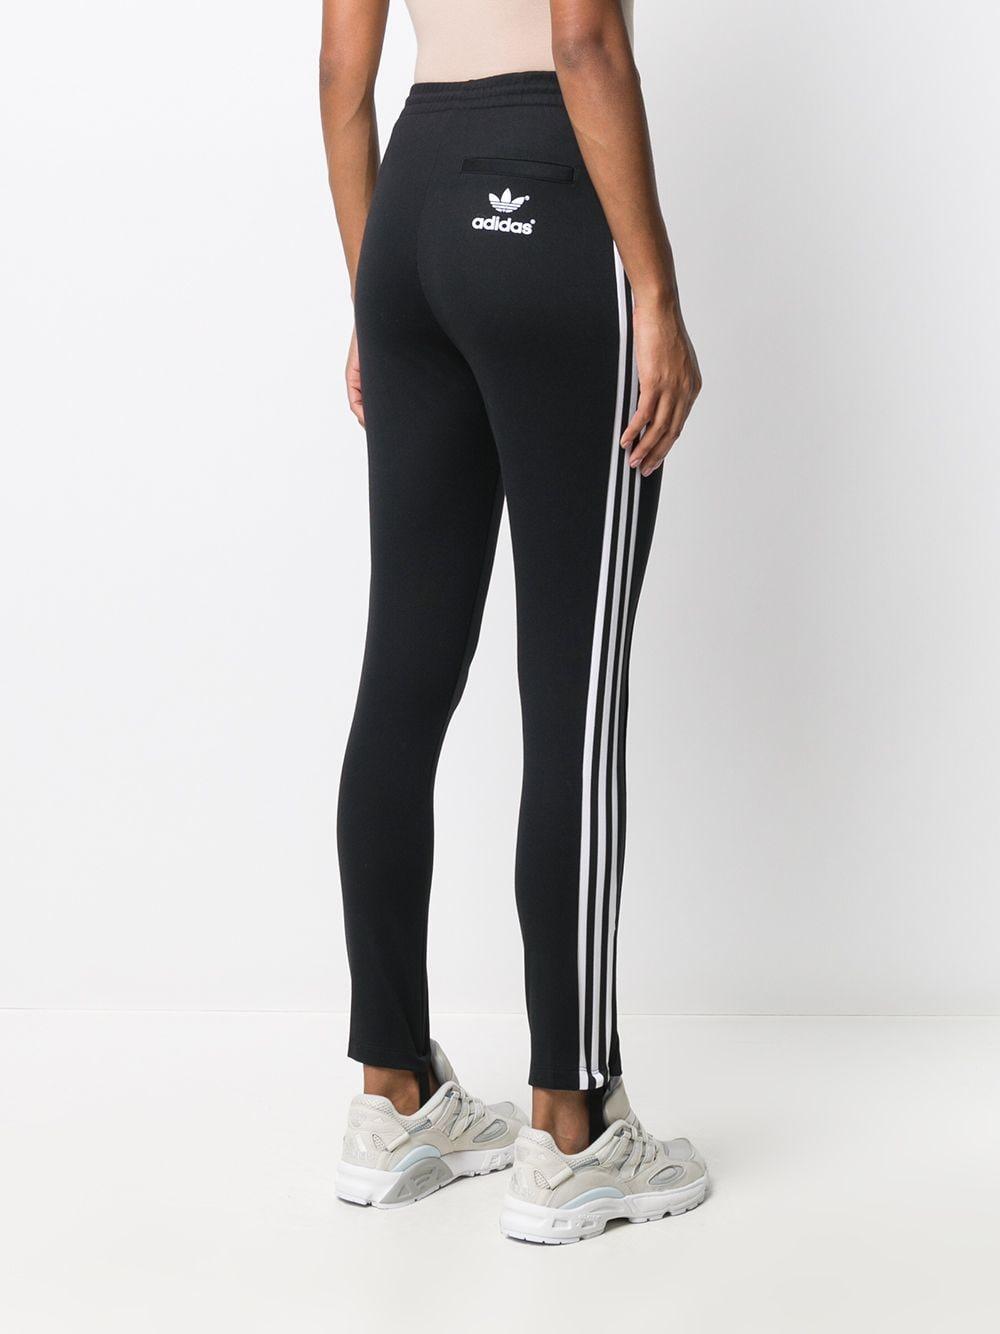 adidas Cotton Striped Stirrup Track Pants in Black - Save 15% - Lyst